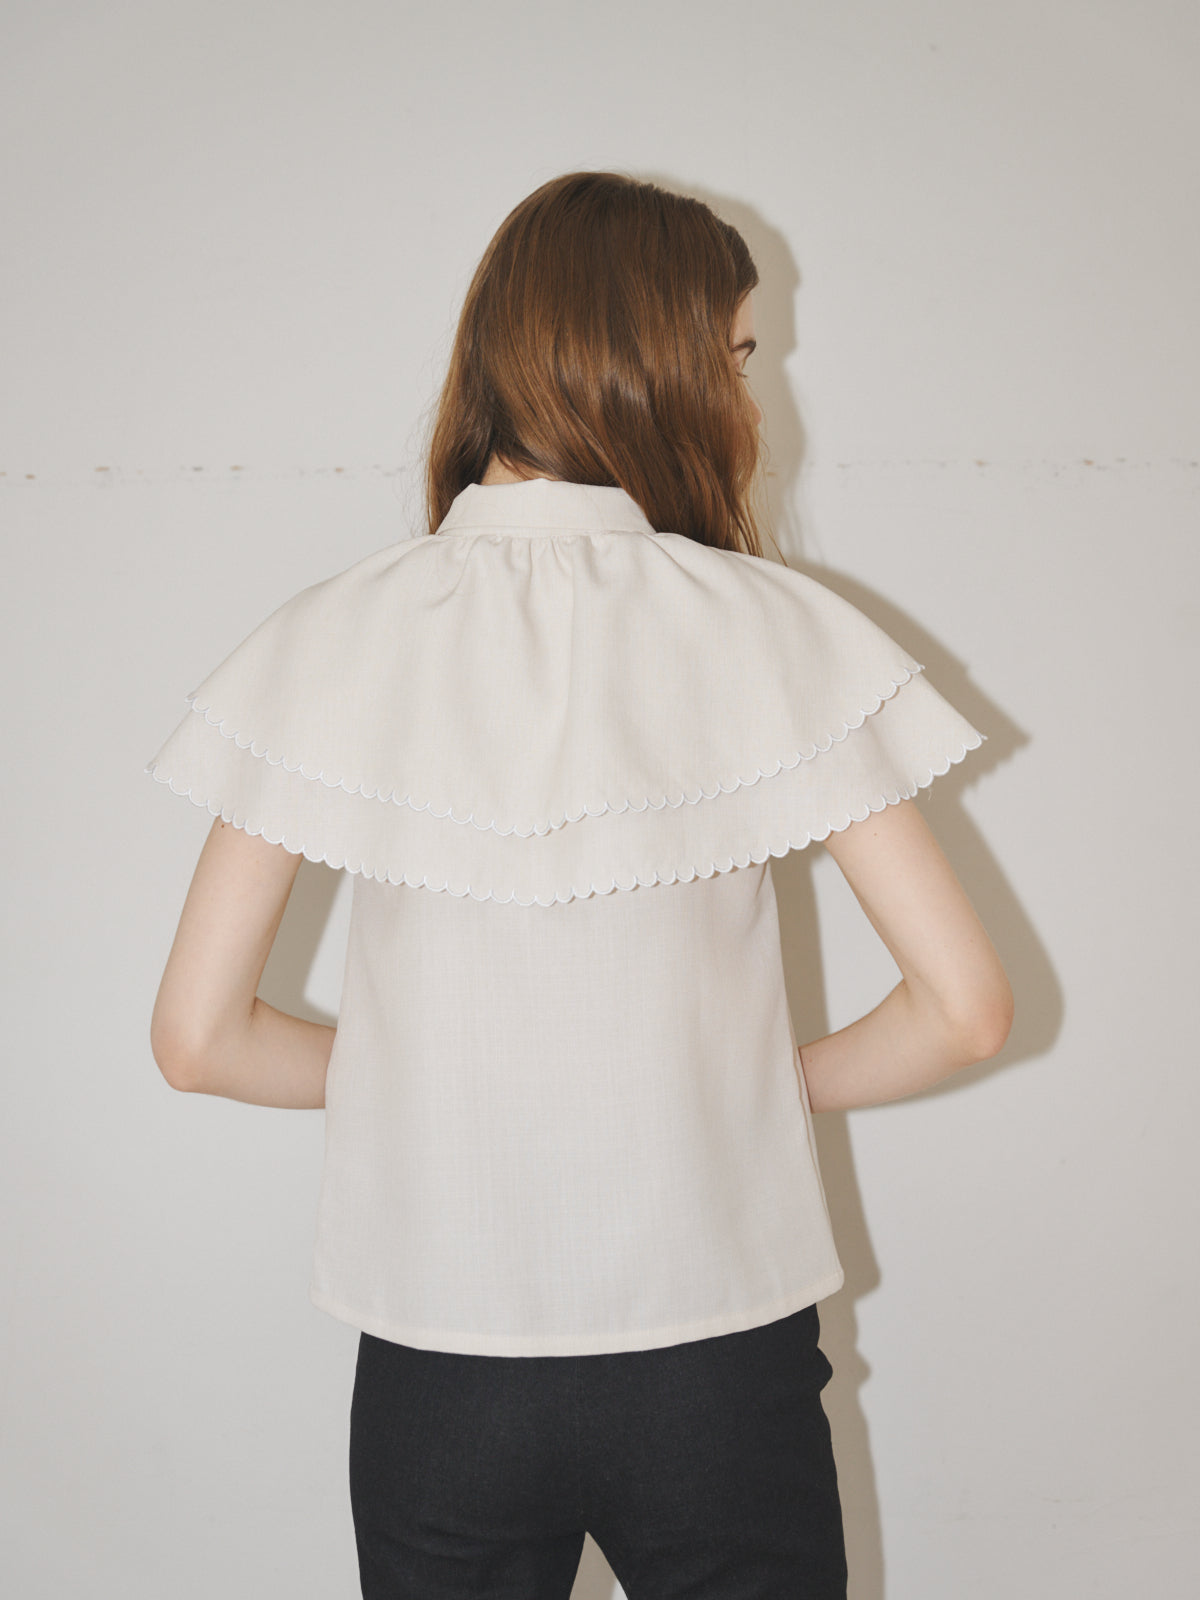 Scale EmbroideryScarf Collar Blouse